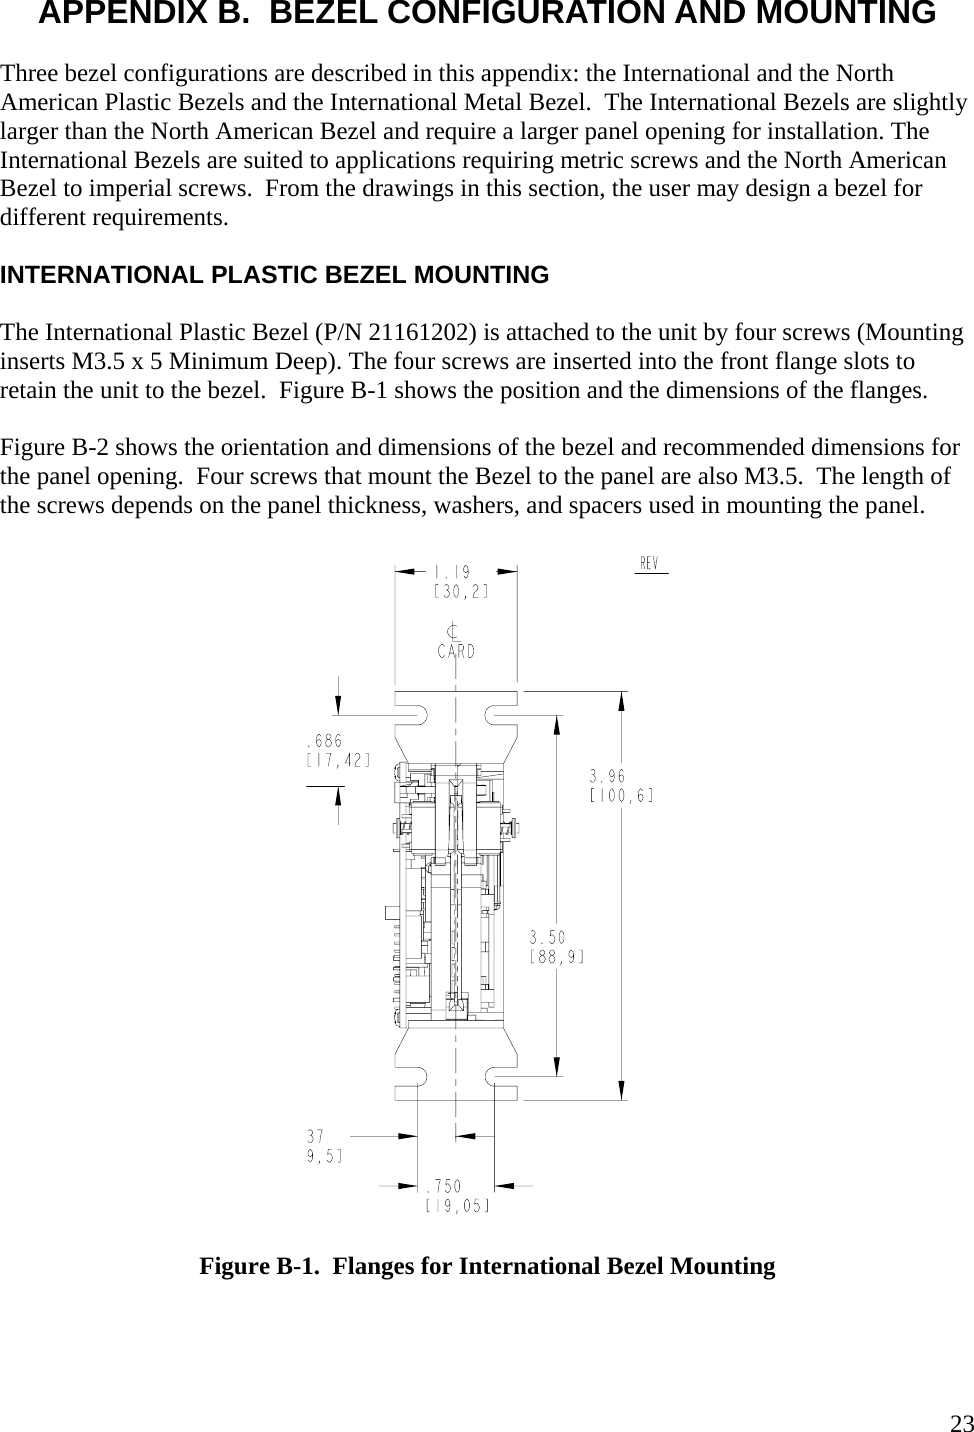   23APPENDIX B.  BEZEL CONFIGURATION AND MOUNTING  Three bezel configurations are described in this appendix: the International and the North American Plastic Bezels and the International Metal Bezel.  The International Bezels are slightly larger than the North American Bezel and require a larger panel opening for installation. The International Bezels are suited to applications requiring metric screws and the North American Bezel to imperial screws.  From the drawings in this section, the user may design a bezel for different requirements.  INTERNATIONAL PLASTIC BEZEL MOUNTING  The International Plastic Bezel (P/N 21161202) is attached to the unit by four screws (Mounting inserts M3.5 x 5 Minimum Deep). The four screws are inserted into the front flange slots to retain the unit to the bezel.  Figure B-1 shows the position and the dimensions of the flanges.  Figure B-2 shows the orientation and dimensions of the bezel and recommended dimensions for the panel opening.  Four screws that mount the Bezel to the panel are also M3.5.  The length of the screws depends on the panel thickness, washers, and spacers used in mounting the panel.    Figure B-1.  Flanges for International Bezel Mounting  